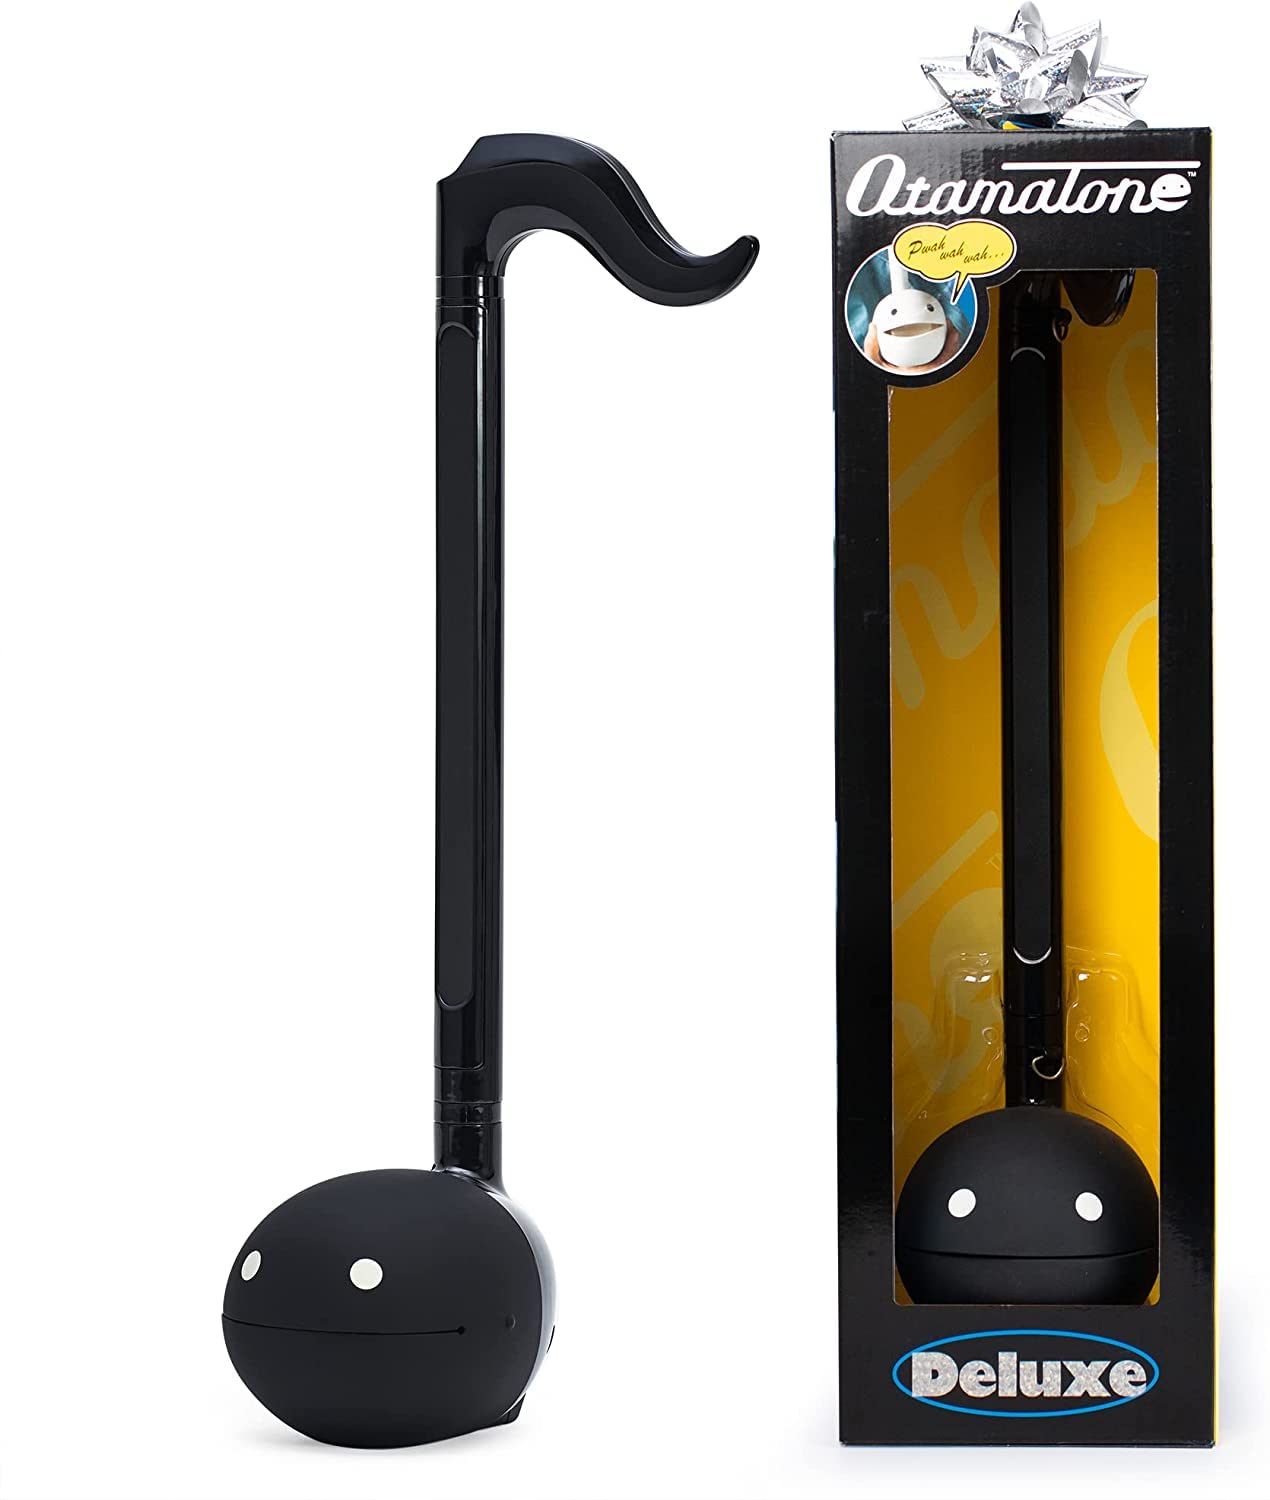 Mua Otamatone Deluxe Electronic Musical Instrument for Adults Teen Kids  Portable Synthesizer Digital Electric Music from Japan by Cube/Maywa Denki  Cool Stuff Teen Gifts Kids Toy, Black [English Manual] trên Amazon Mỹ